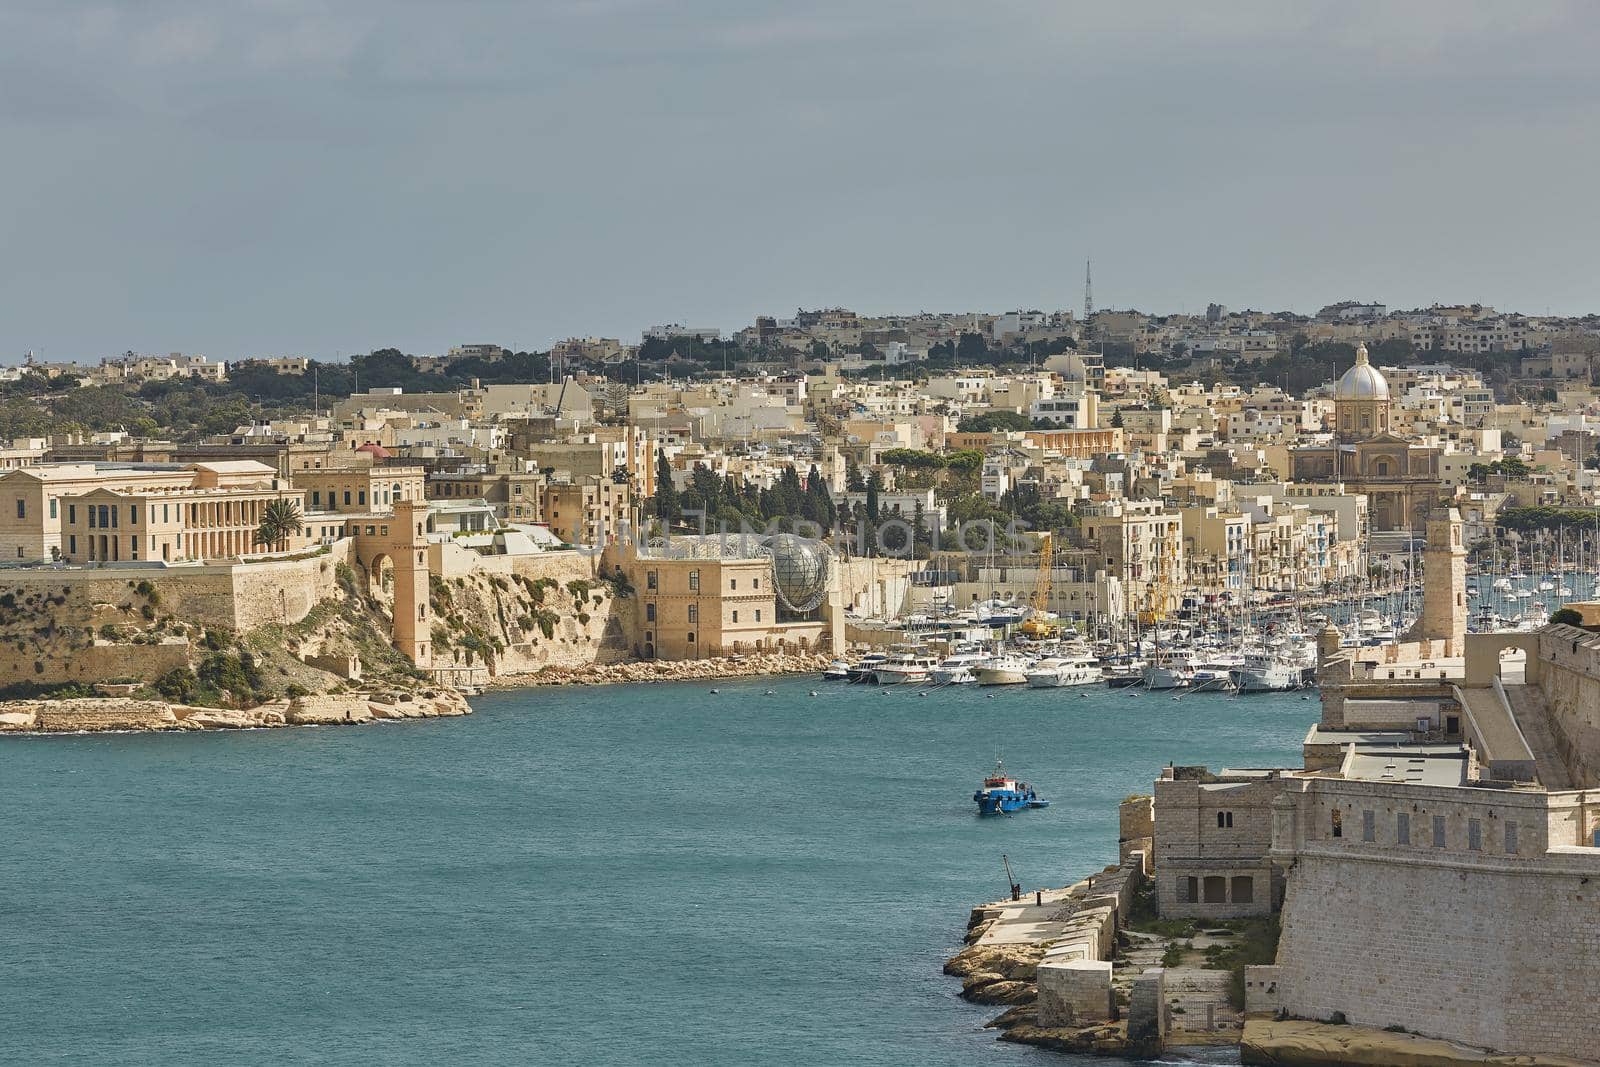 View of old town and its port in Valletta in Malta.